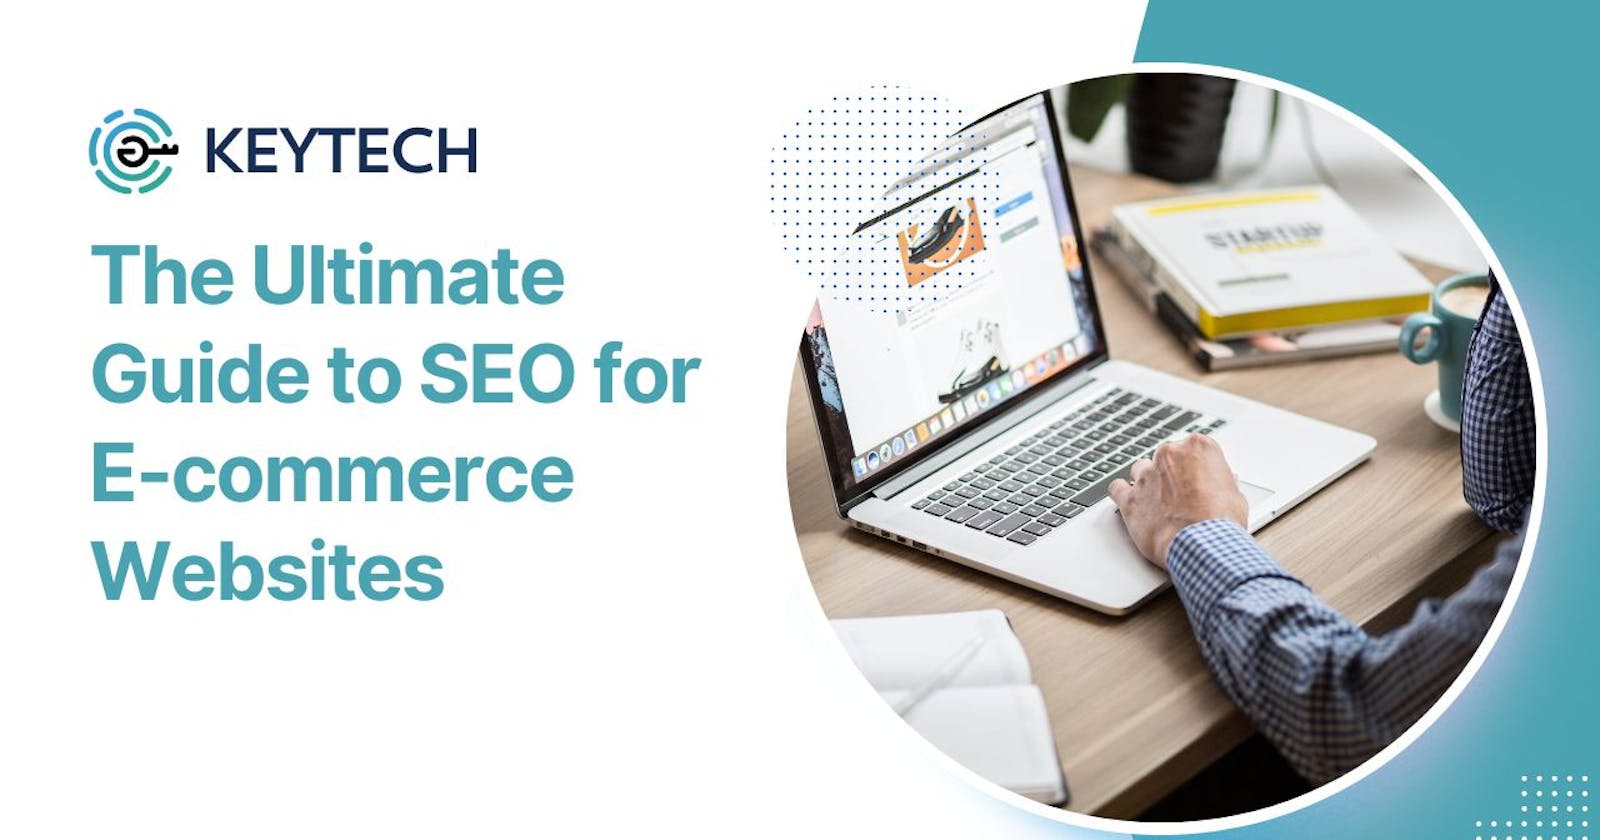 What is SEO? Guide to SEO for E-commerce Websites